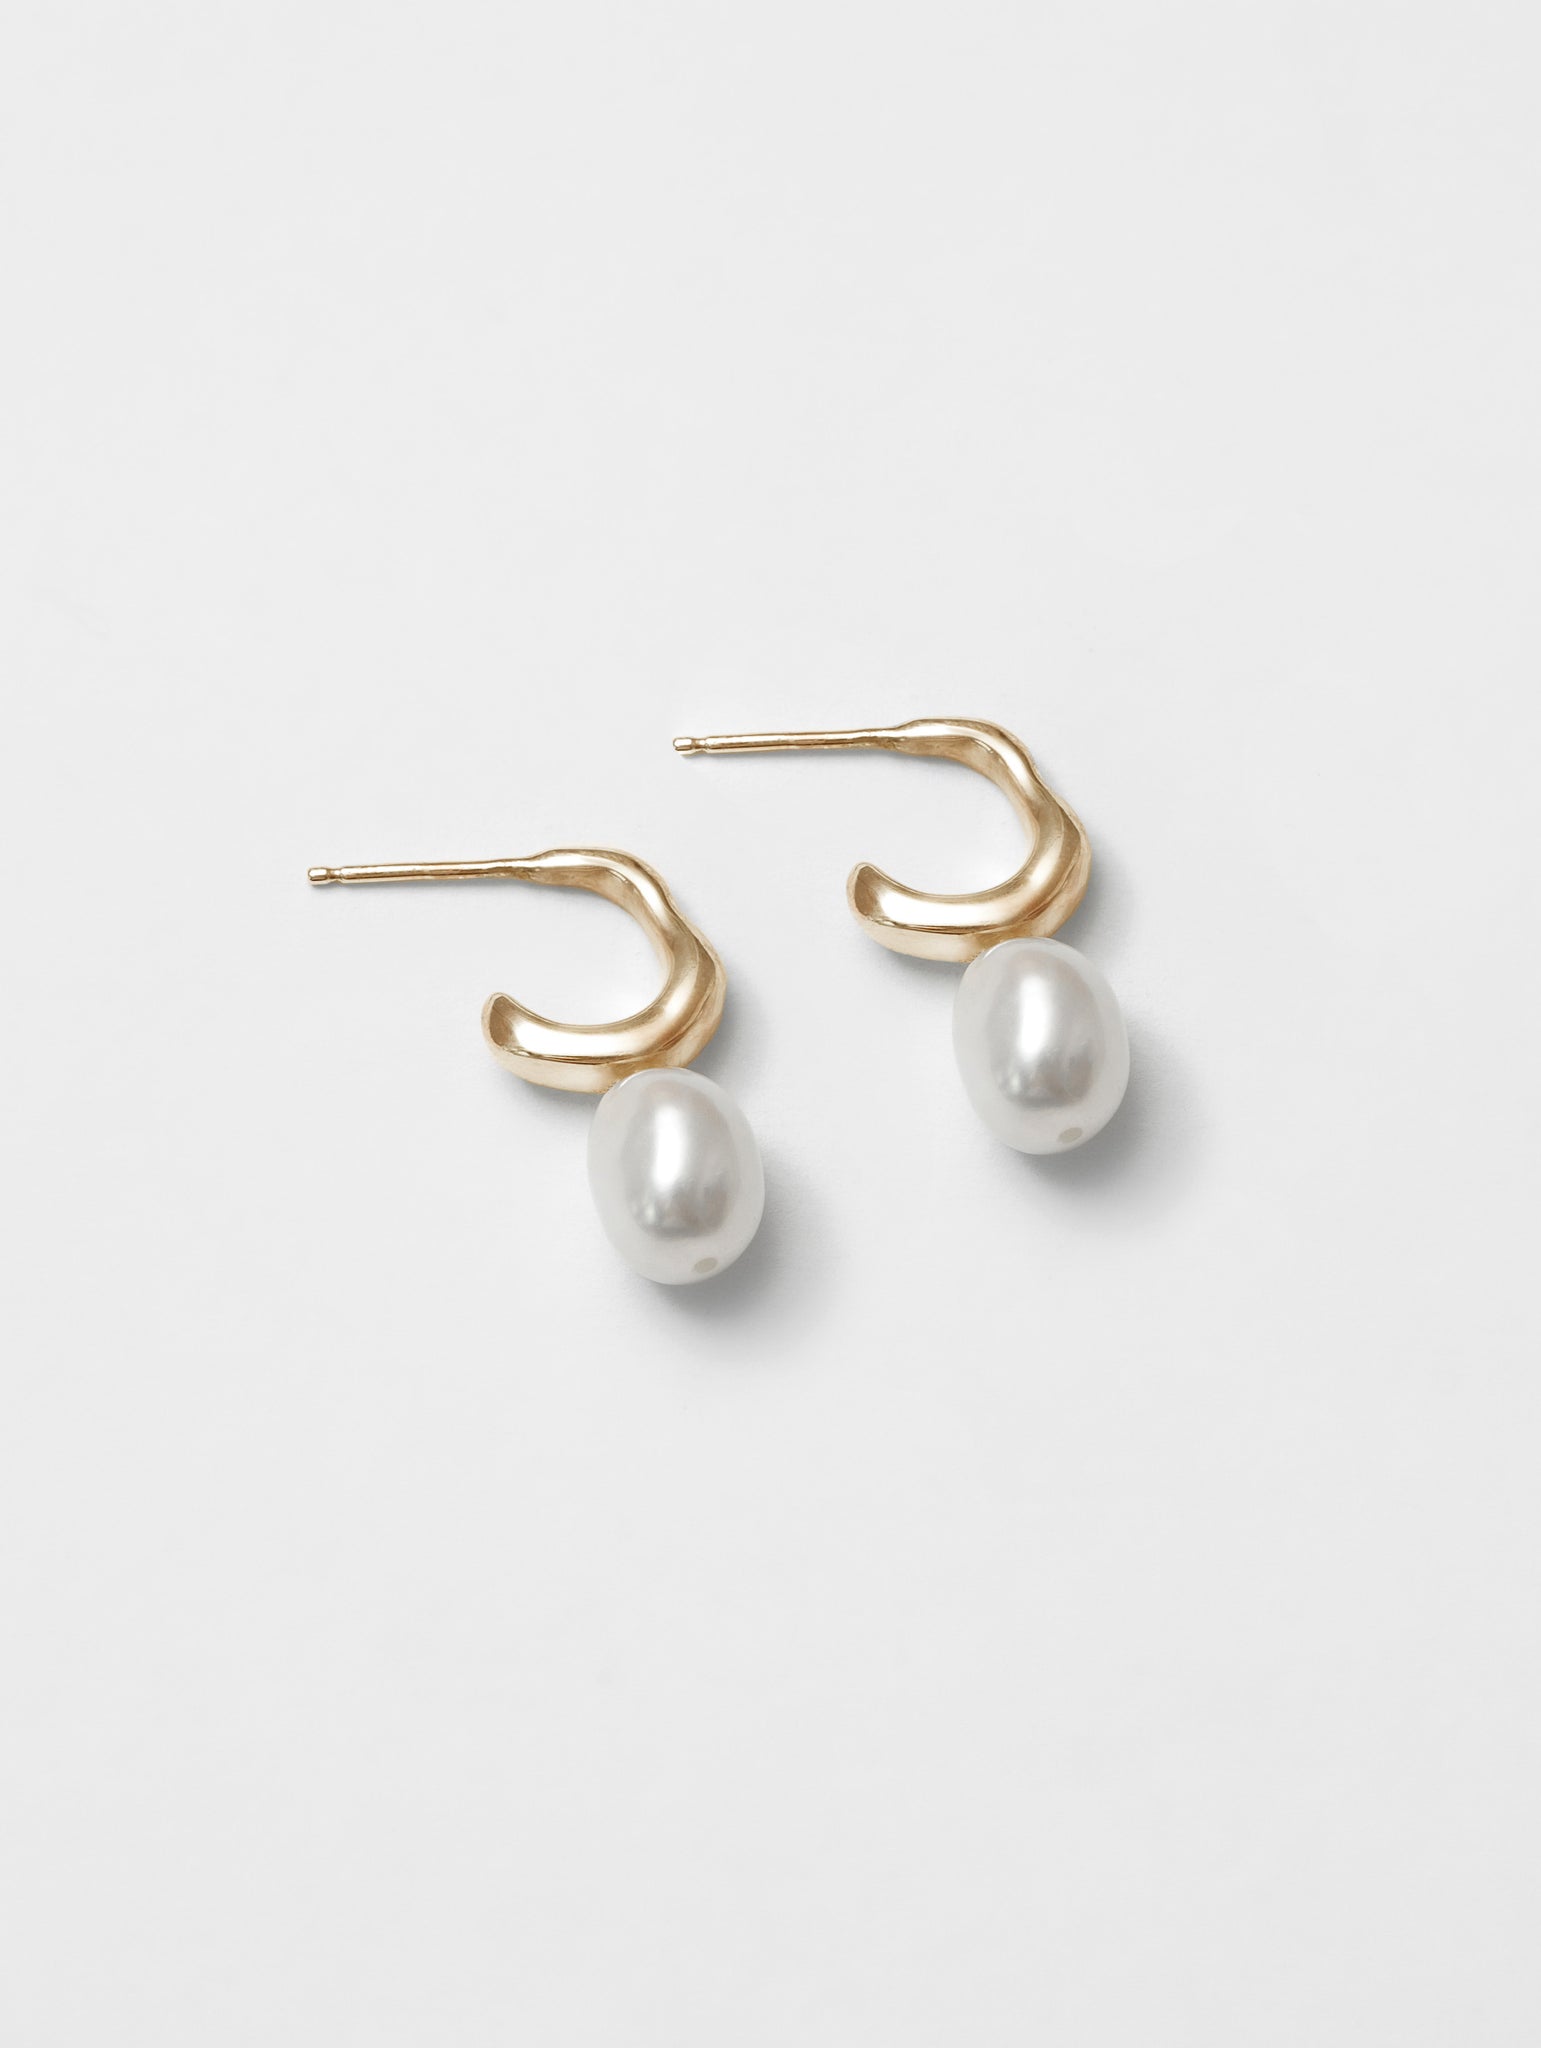    Wolf-Circus-Classic-Pearl-Hoop-Stud-in-14k-Gold-Plated-Bronze-Emmy-Earring-in-Gold-Earrings-Jewelry